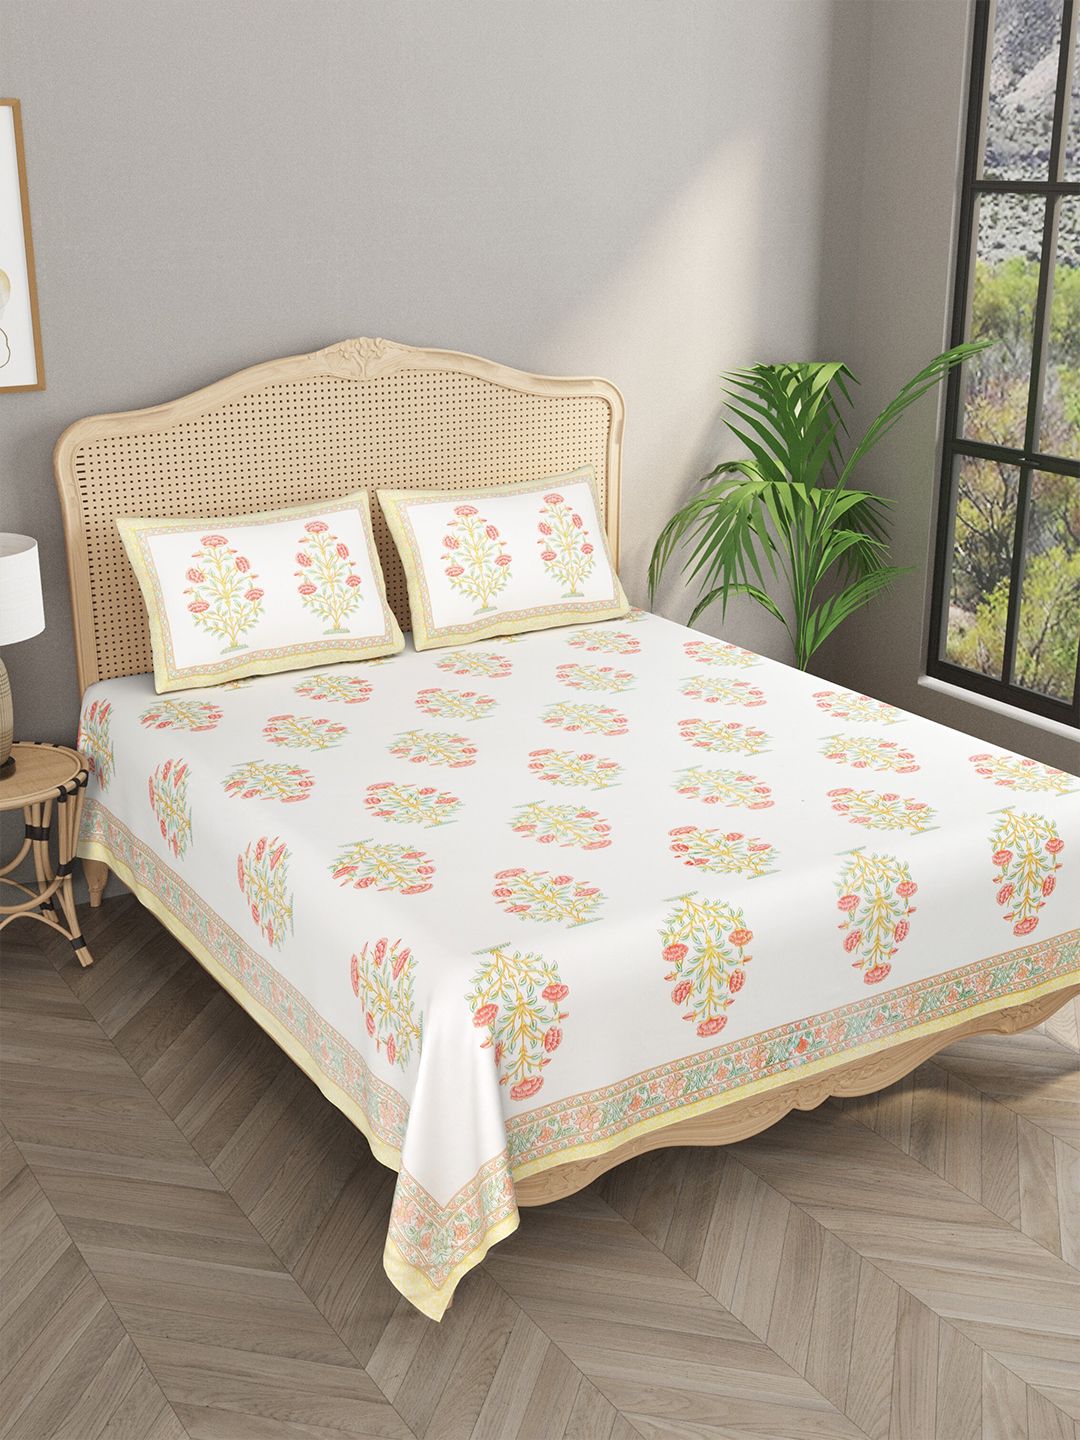 Gulaab Jaipur White & Green Floral 600 TC Egyptian Cotton King Bedsheet with 2 Pillow Covers Price in India